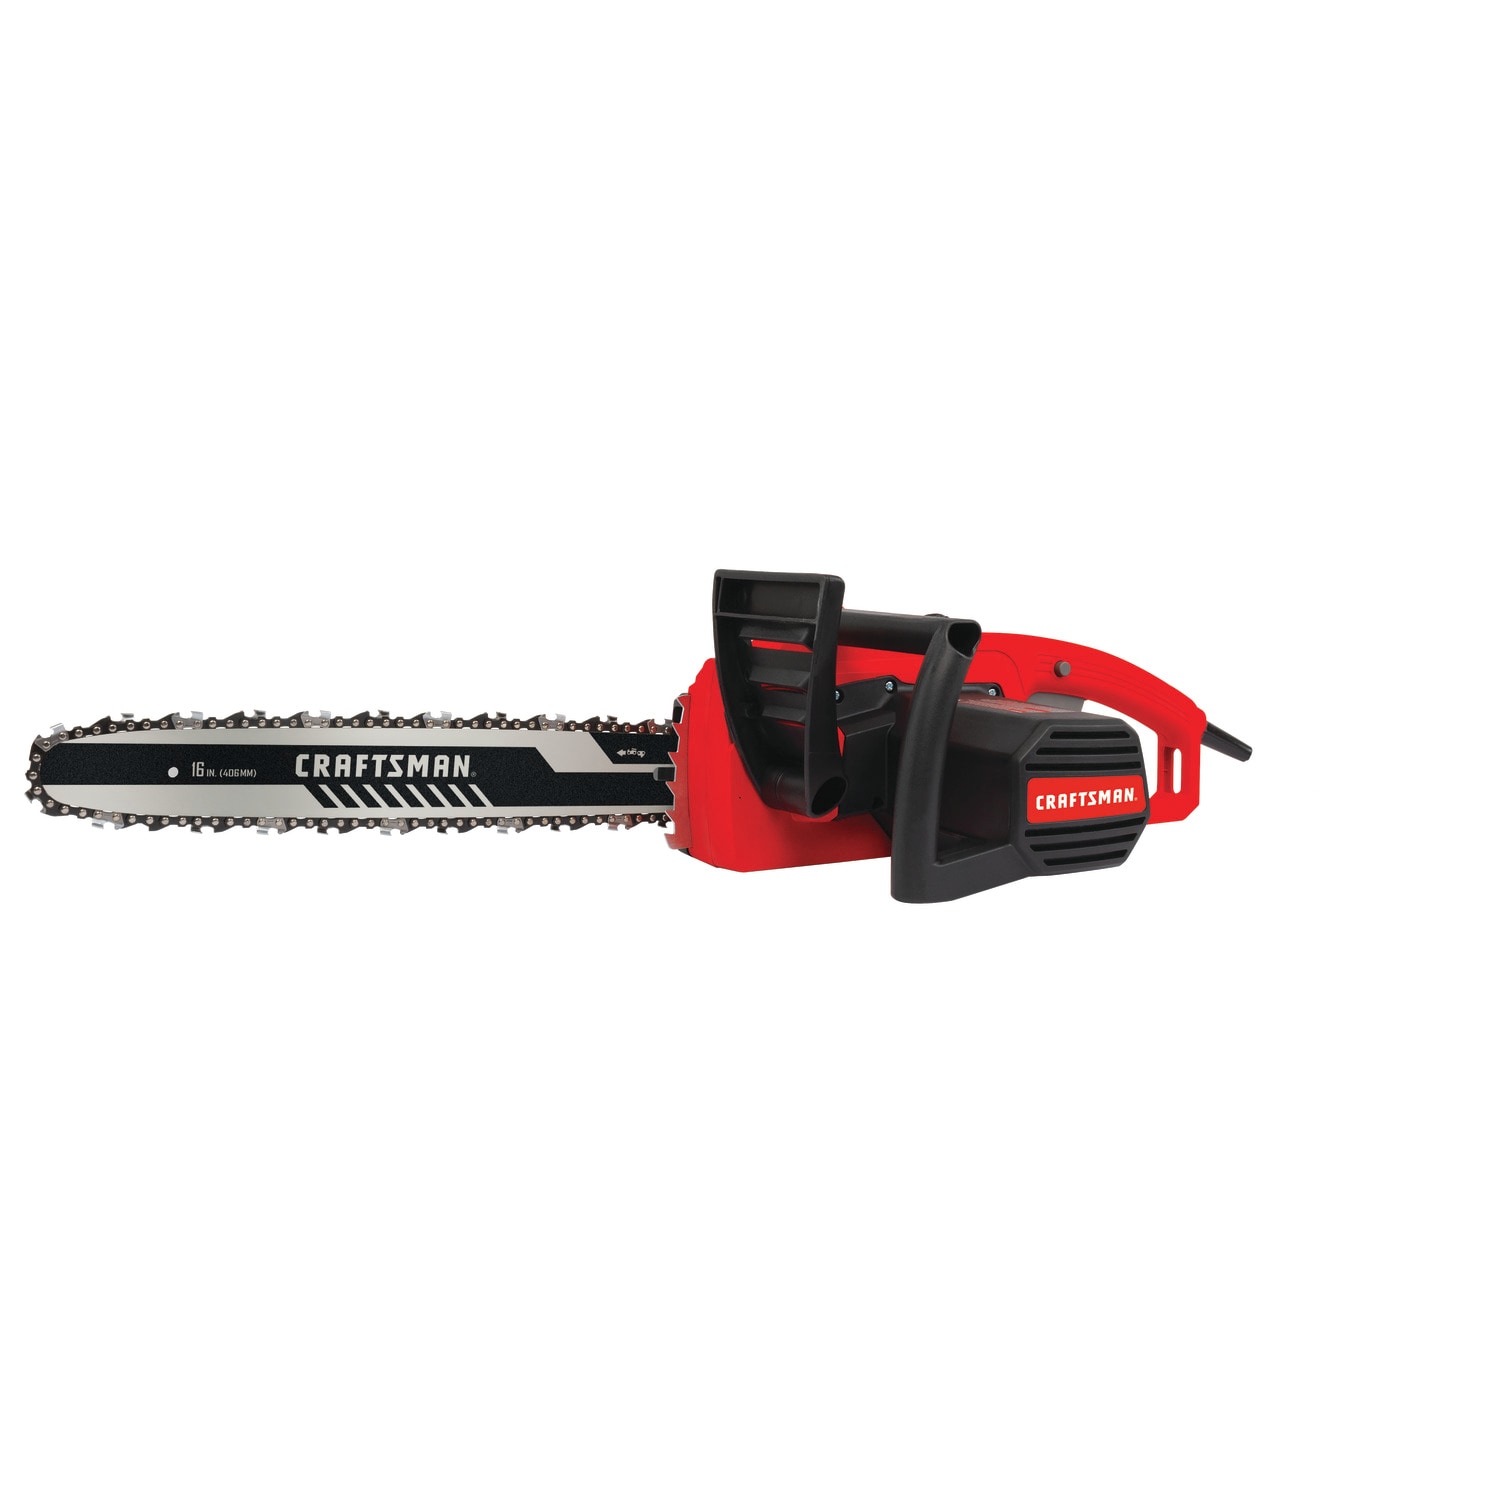 ZOMBI 16 13-Amp 120V Corded Chainsaw – American Lawn Mower Co. EST 1895